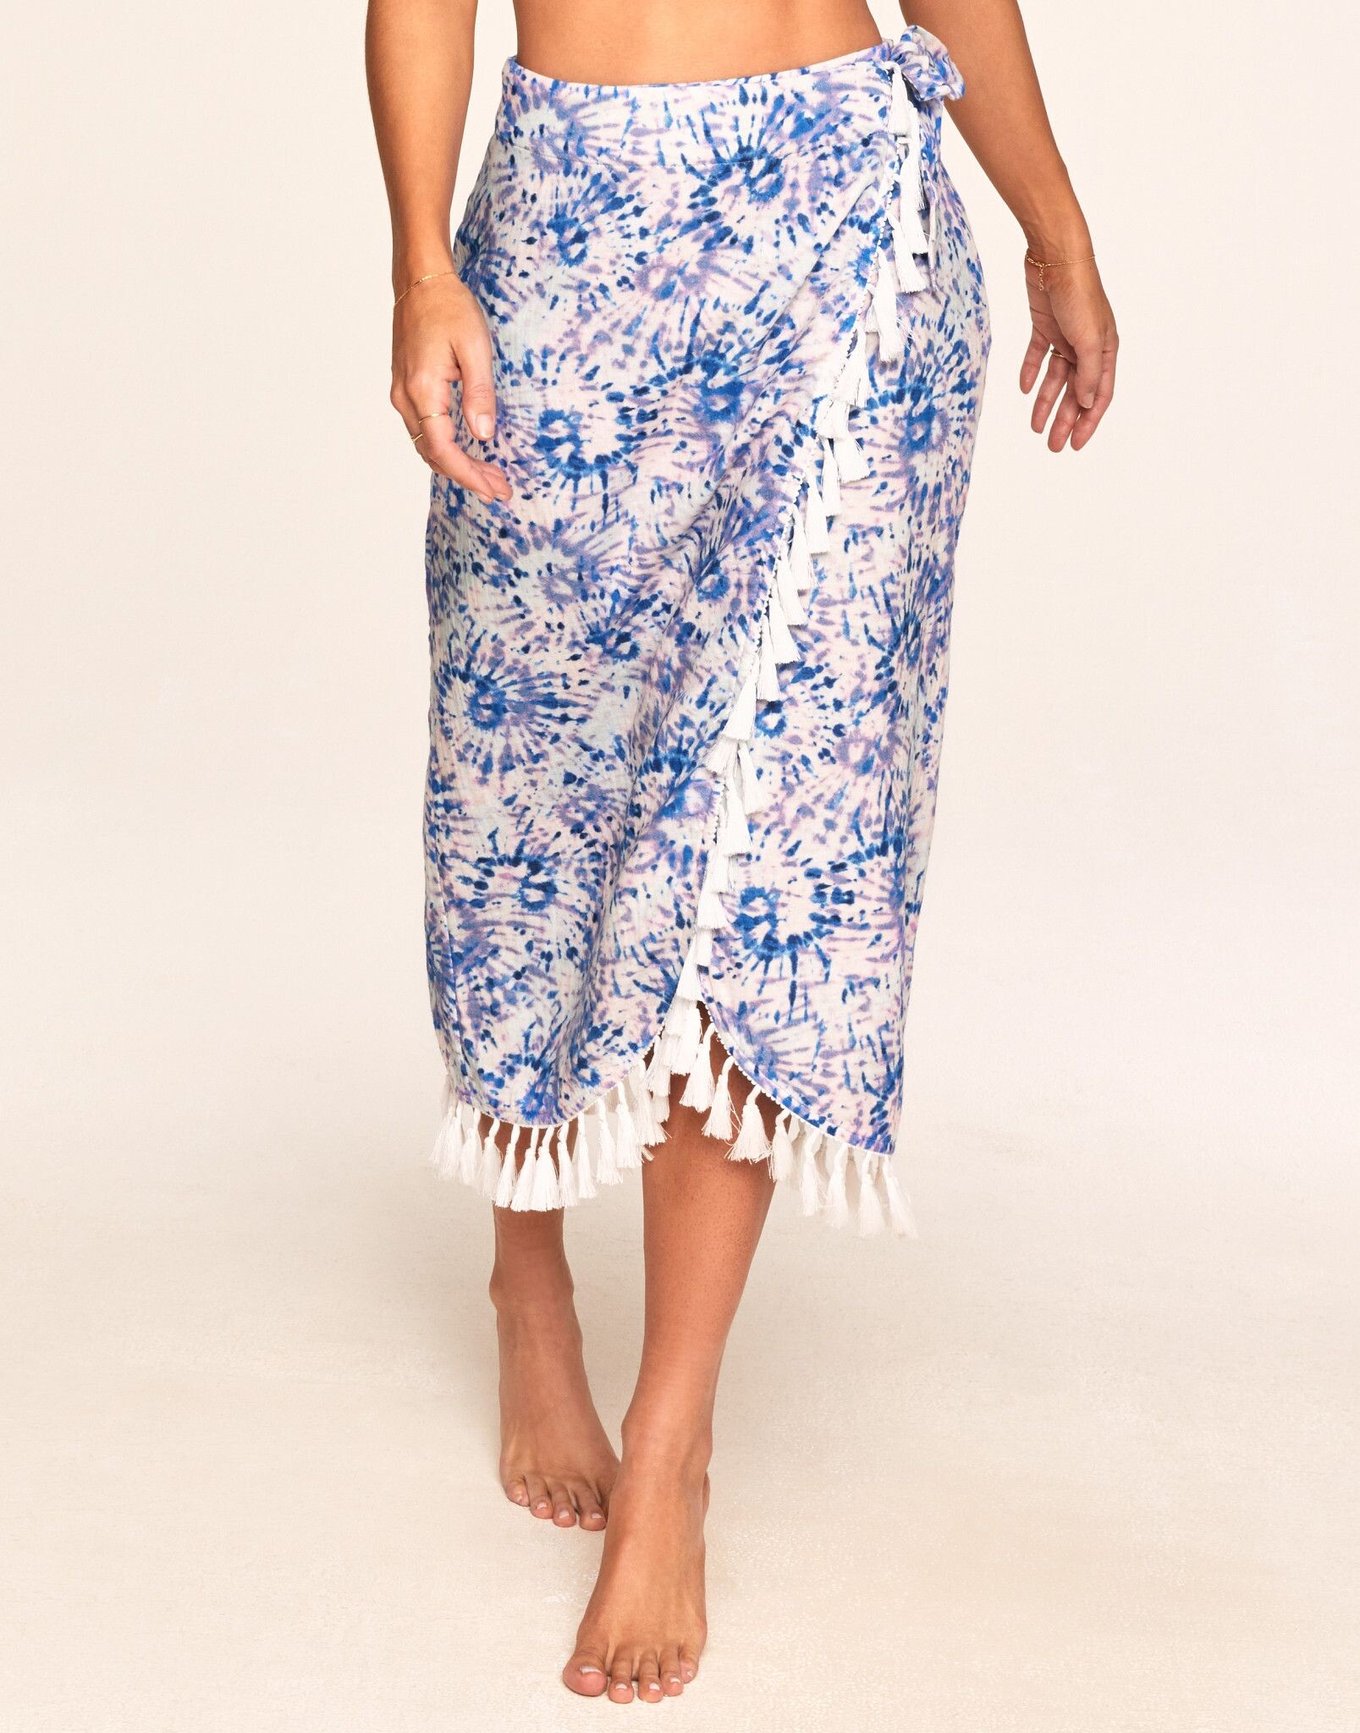 Catalina Cover-Up Skirt